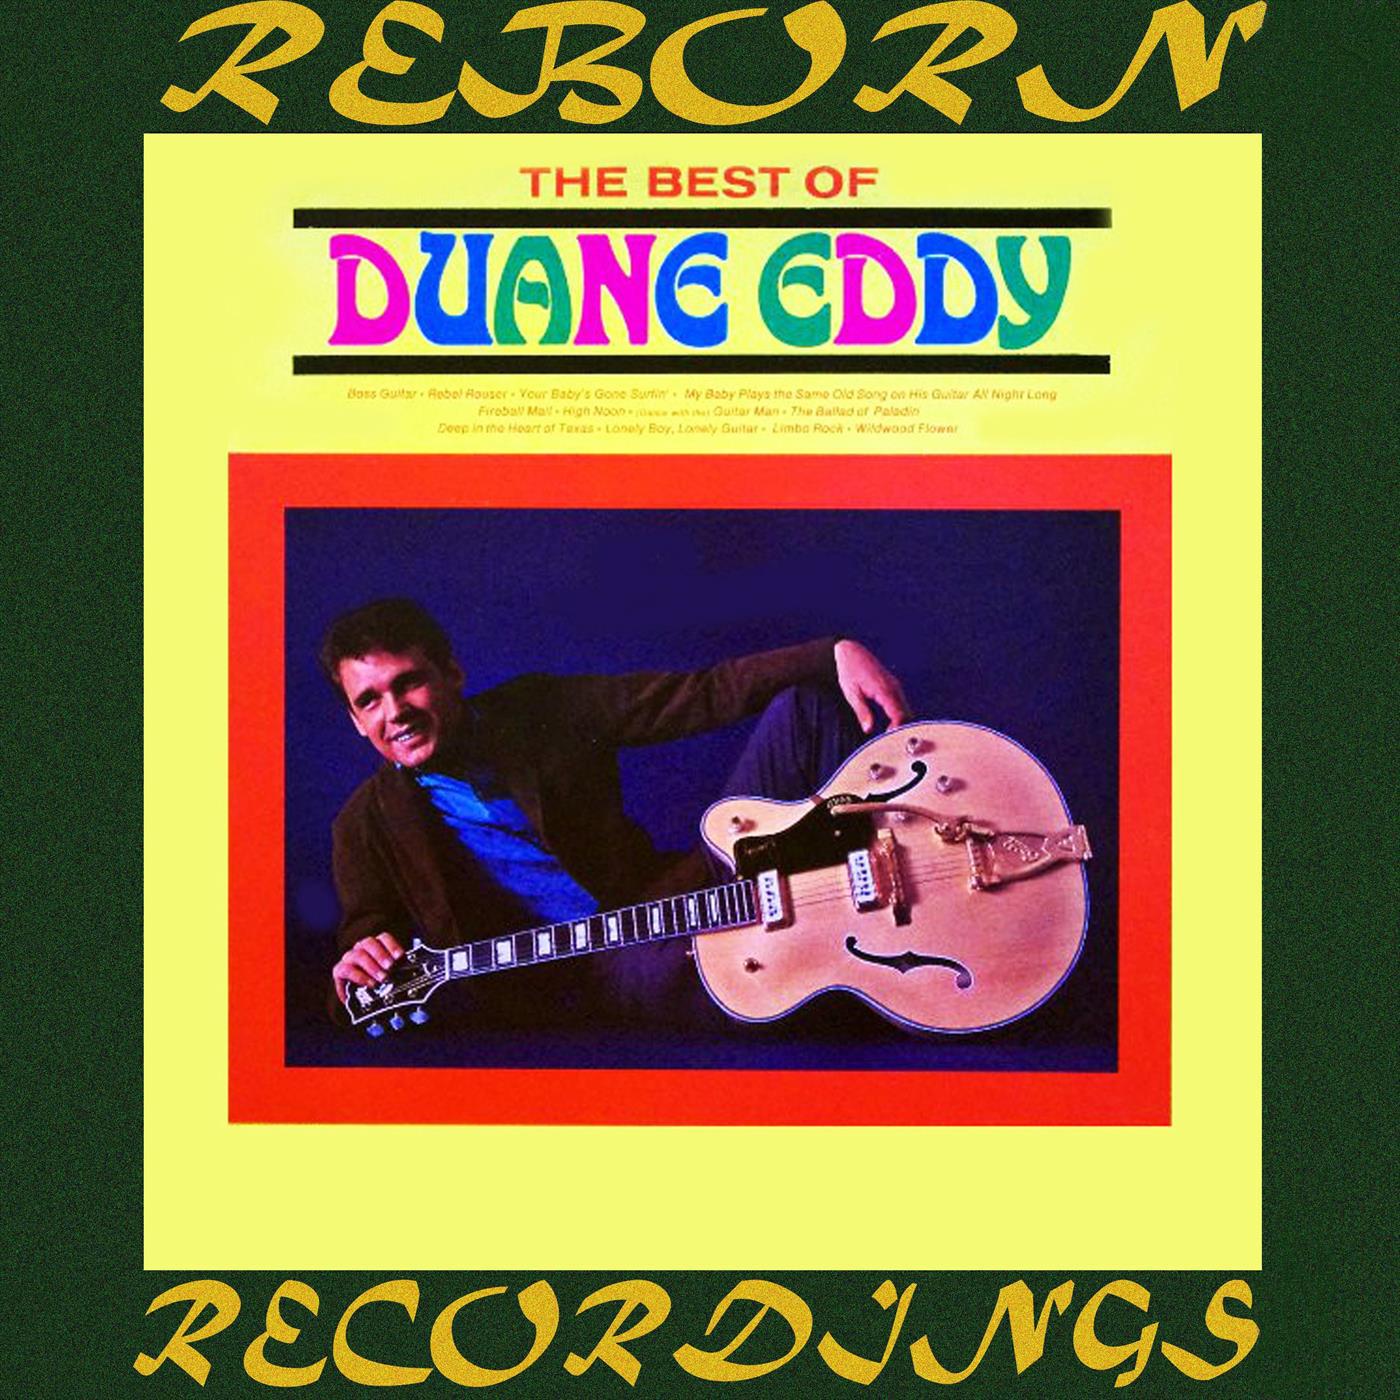 The Best of Duane Eddy (HD Remastered)